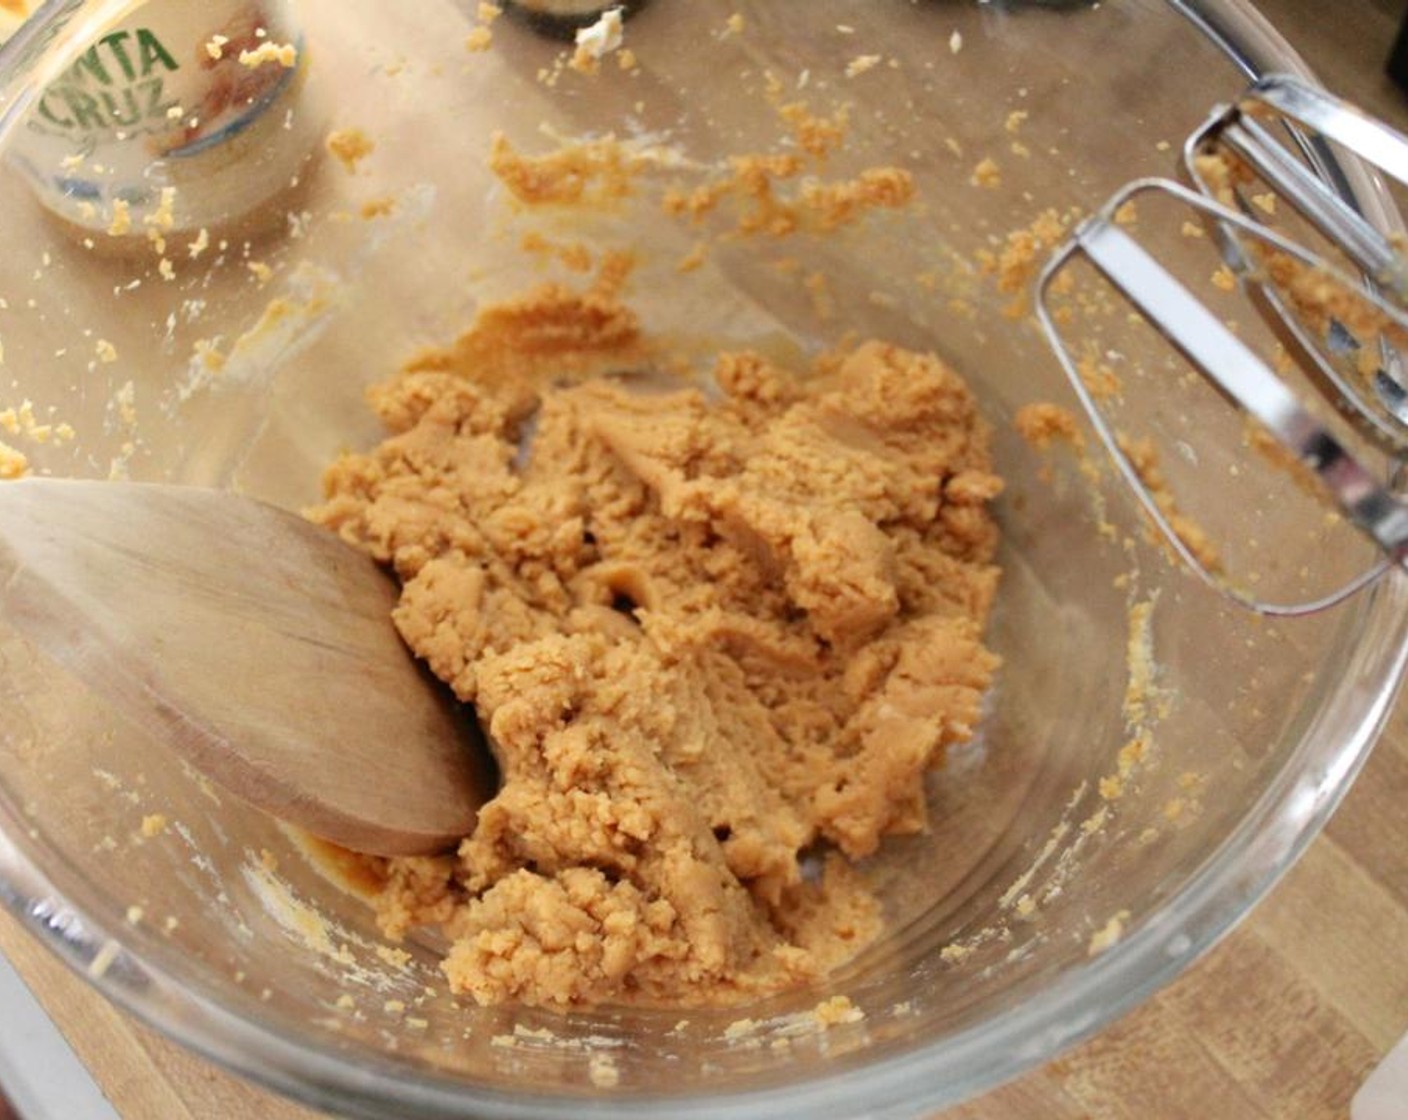 step 5 For the peanut butter filling, beat the Natural Peanut Butter (3/4 cup), Cream Cheese (3/4 cup), Powdered Confectioners Sugar (1/2 cup), and Pure Vanilla Extract (1/2 Tbsp) on medium-high speed with a hand mixer for 3 minutes.